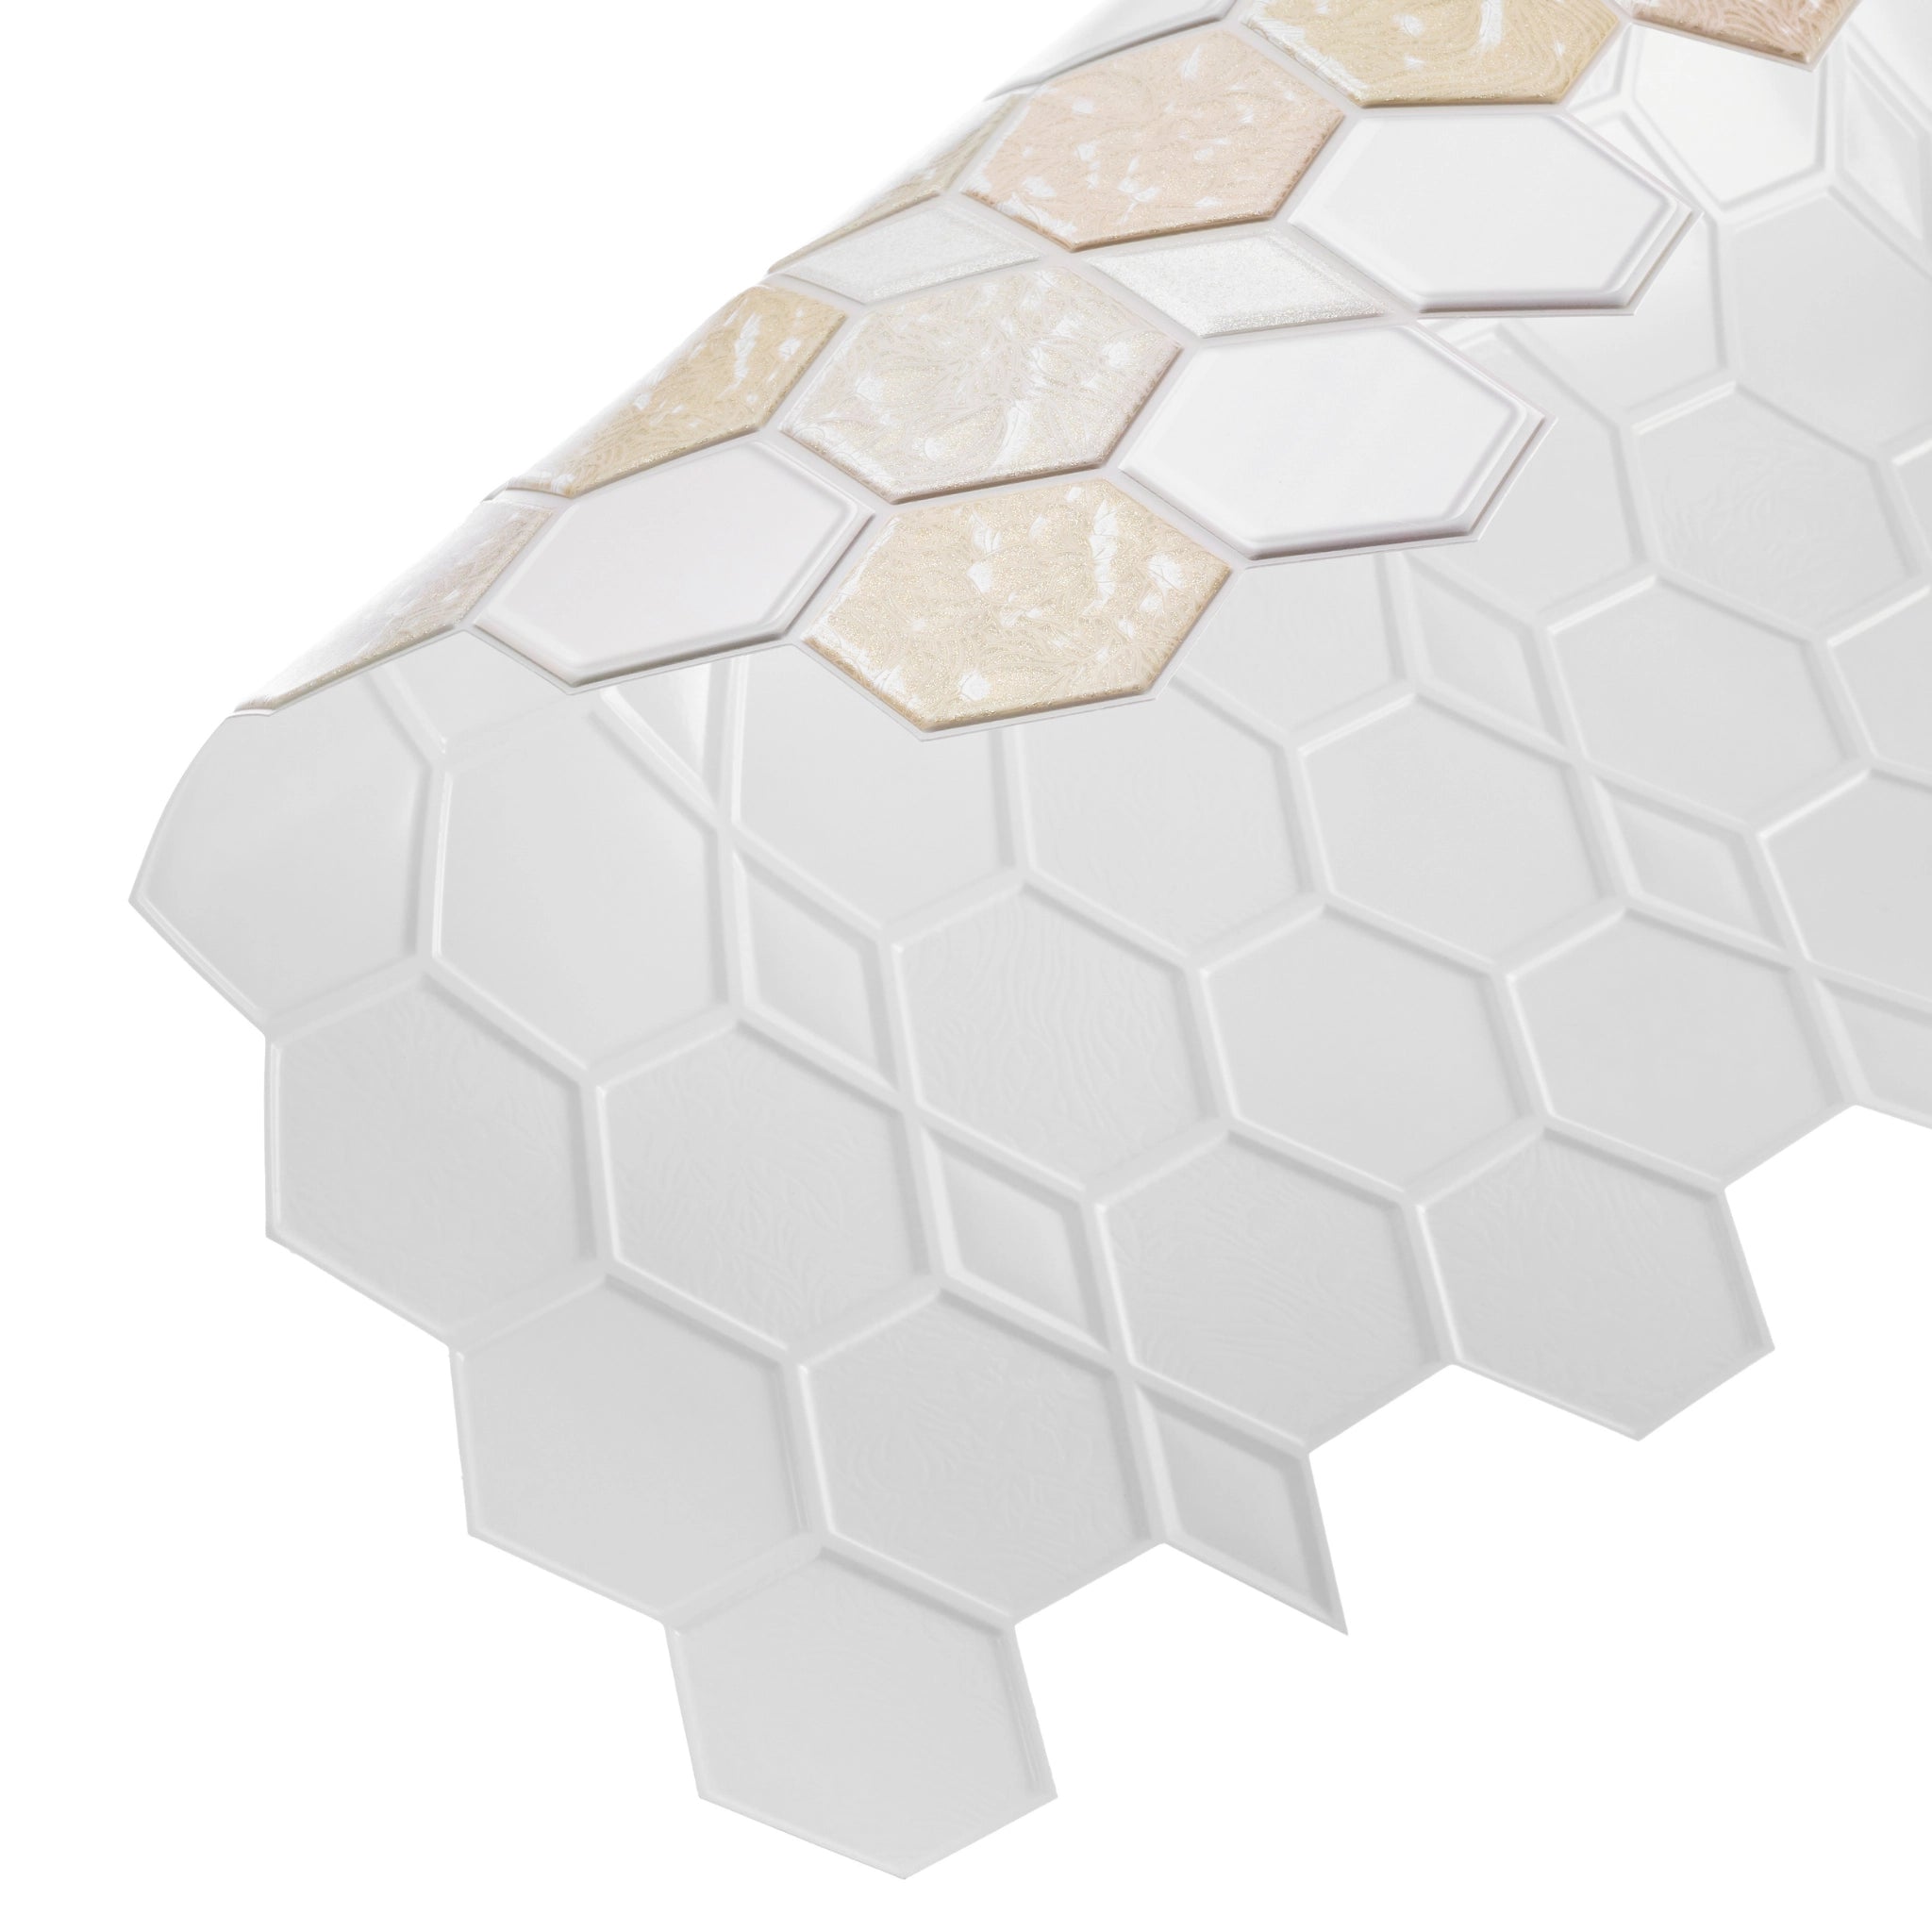 Closer look of the white & beige 3D wall panel